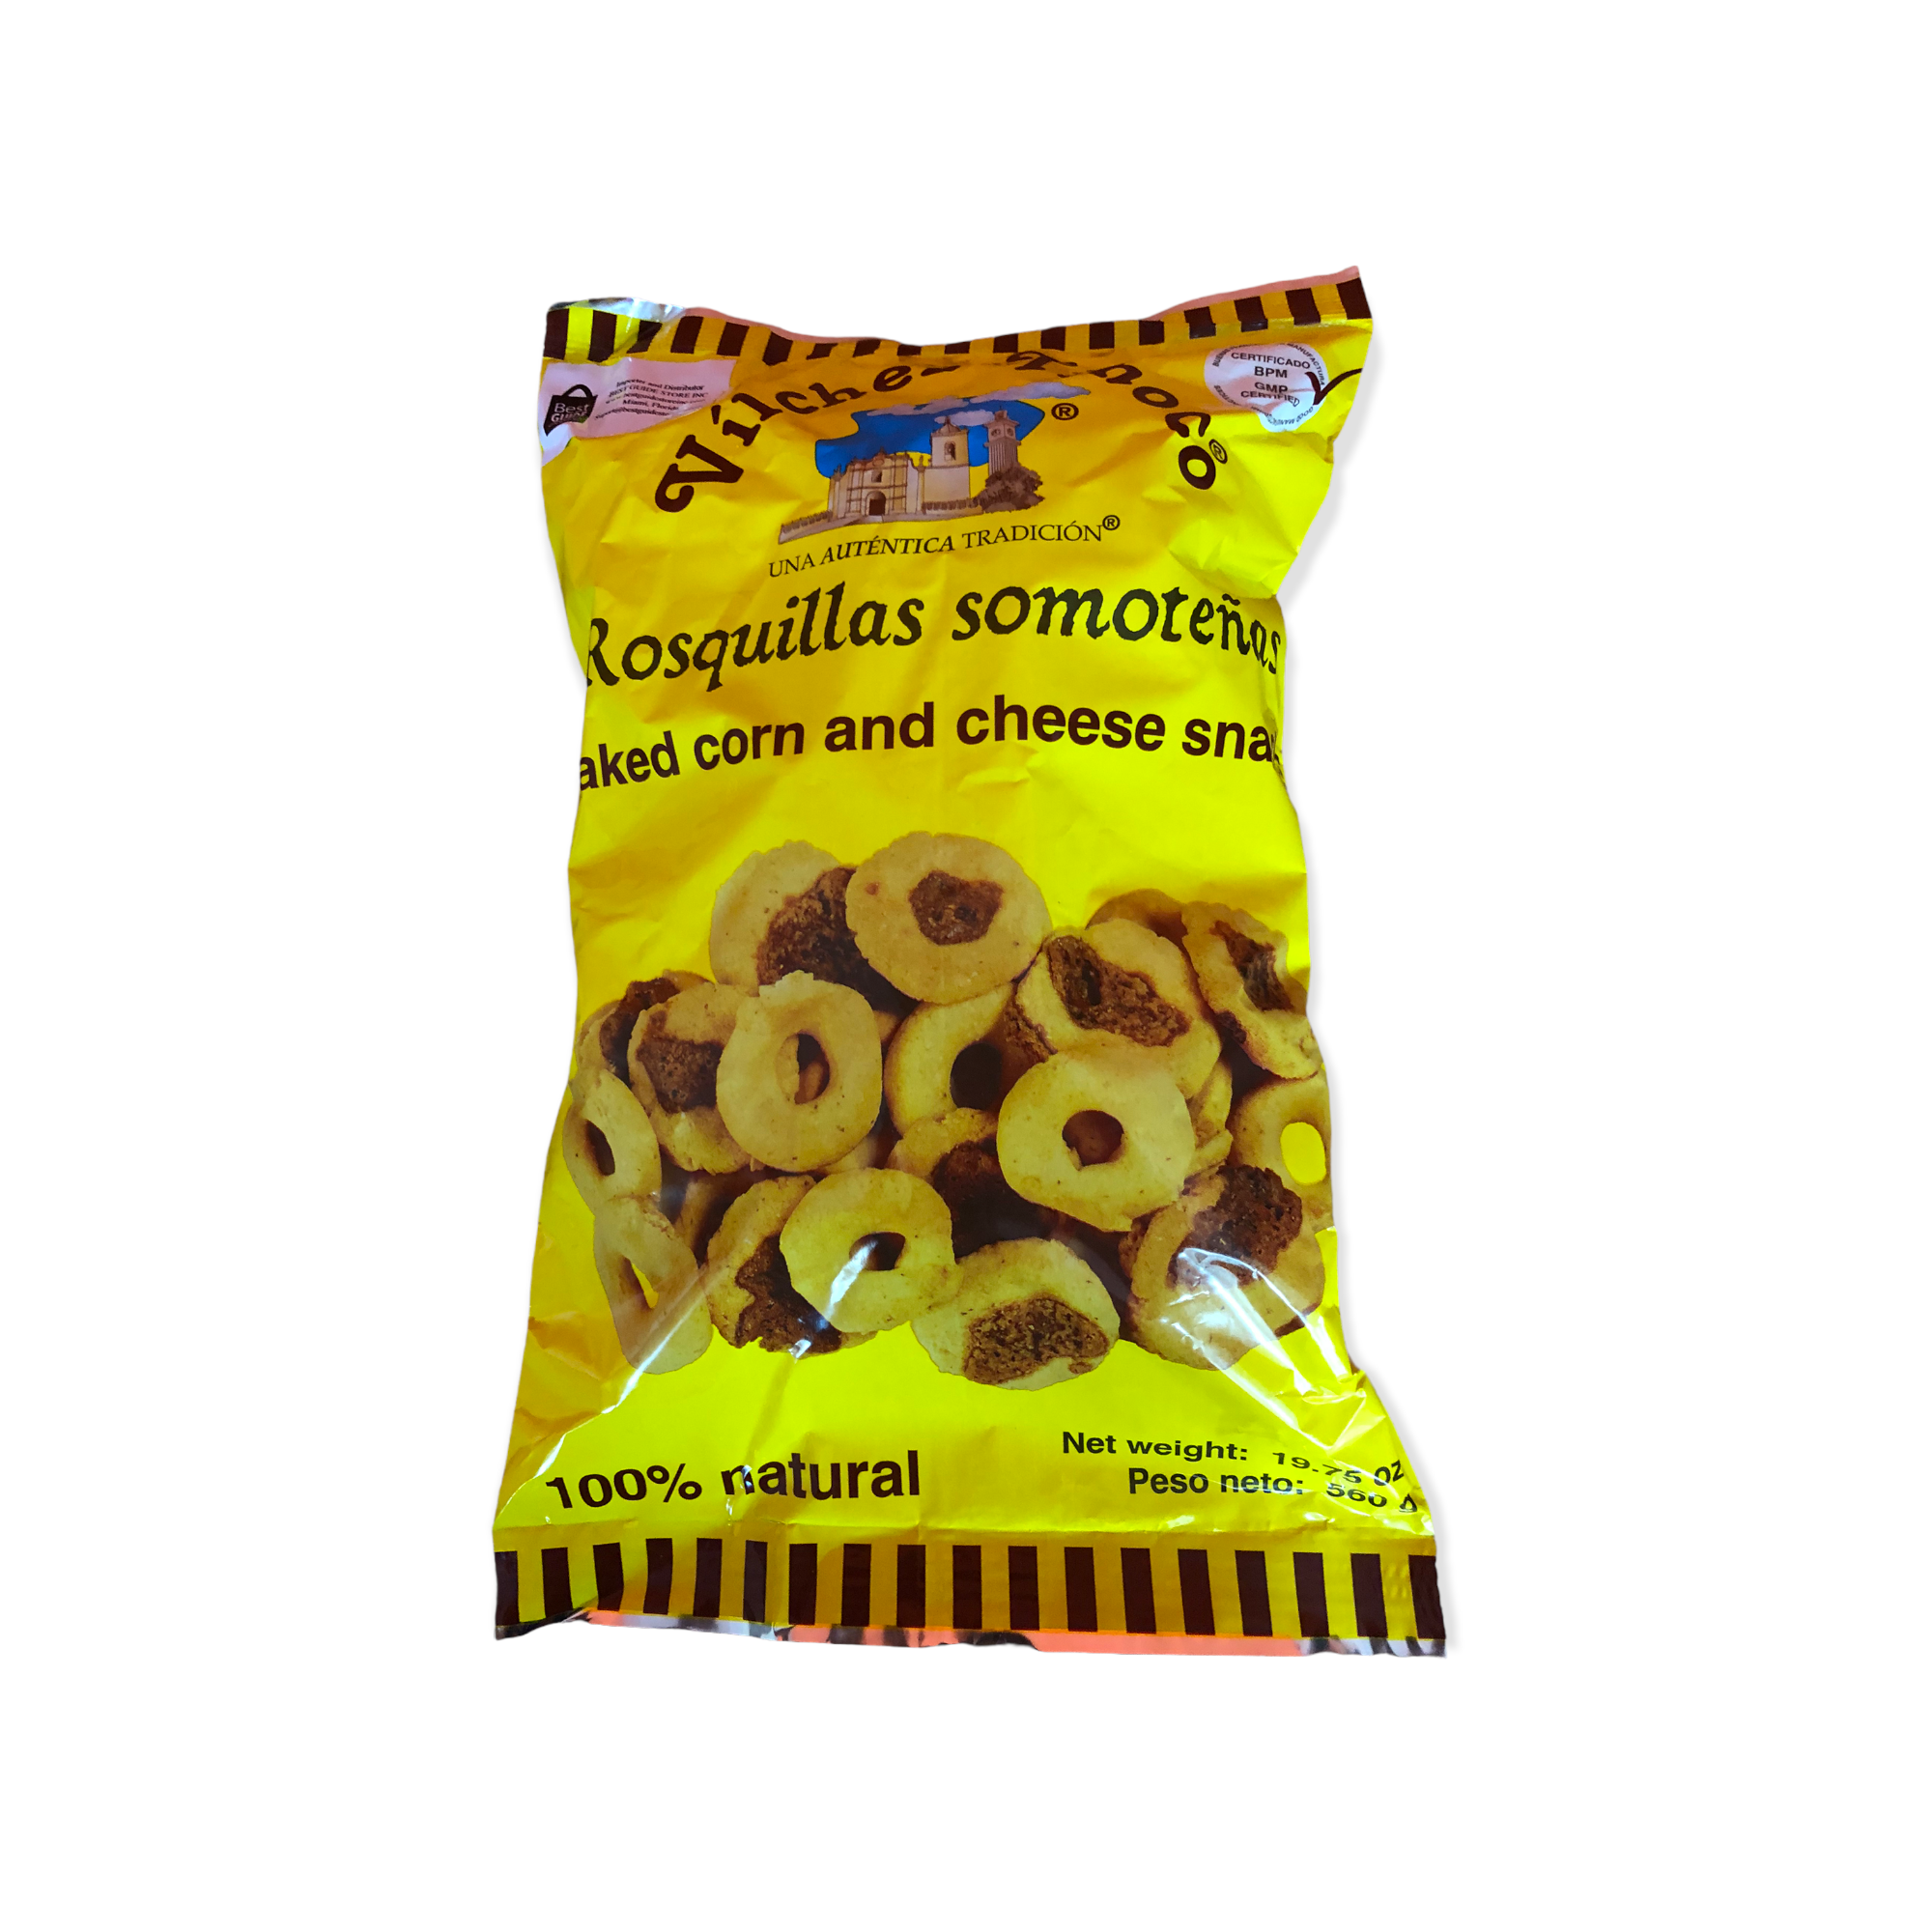 Rosquillas Vilchez Tinoco - Nicaragua Cookies (1,3, 7 and Family Pack)